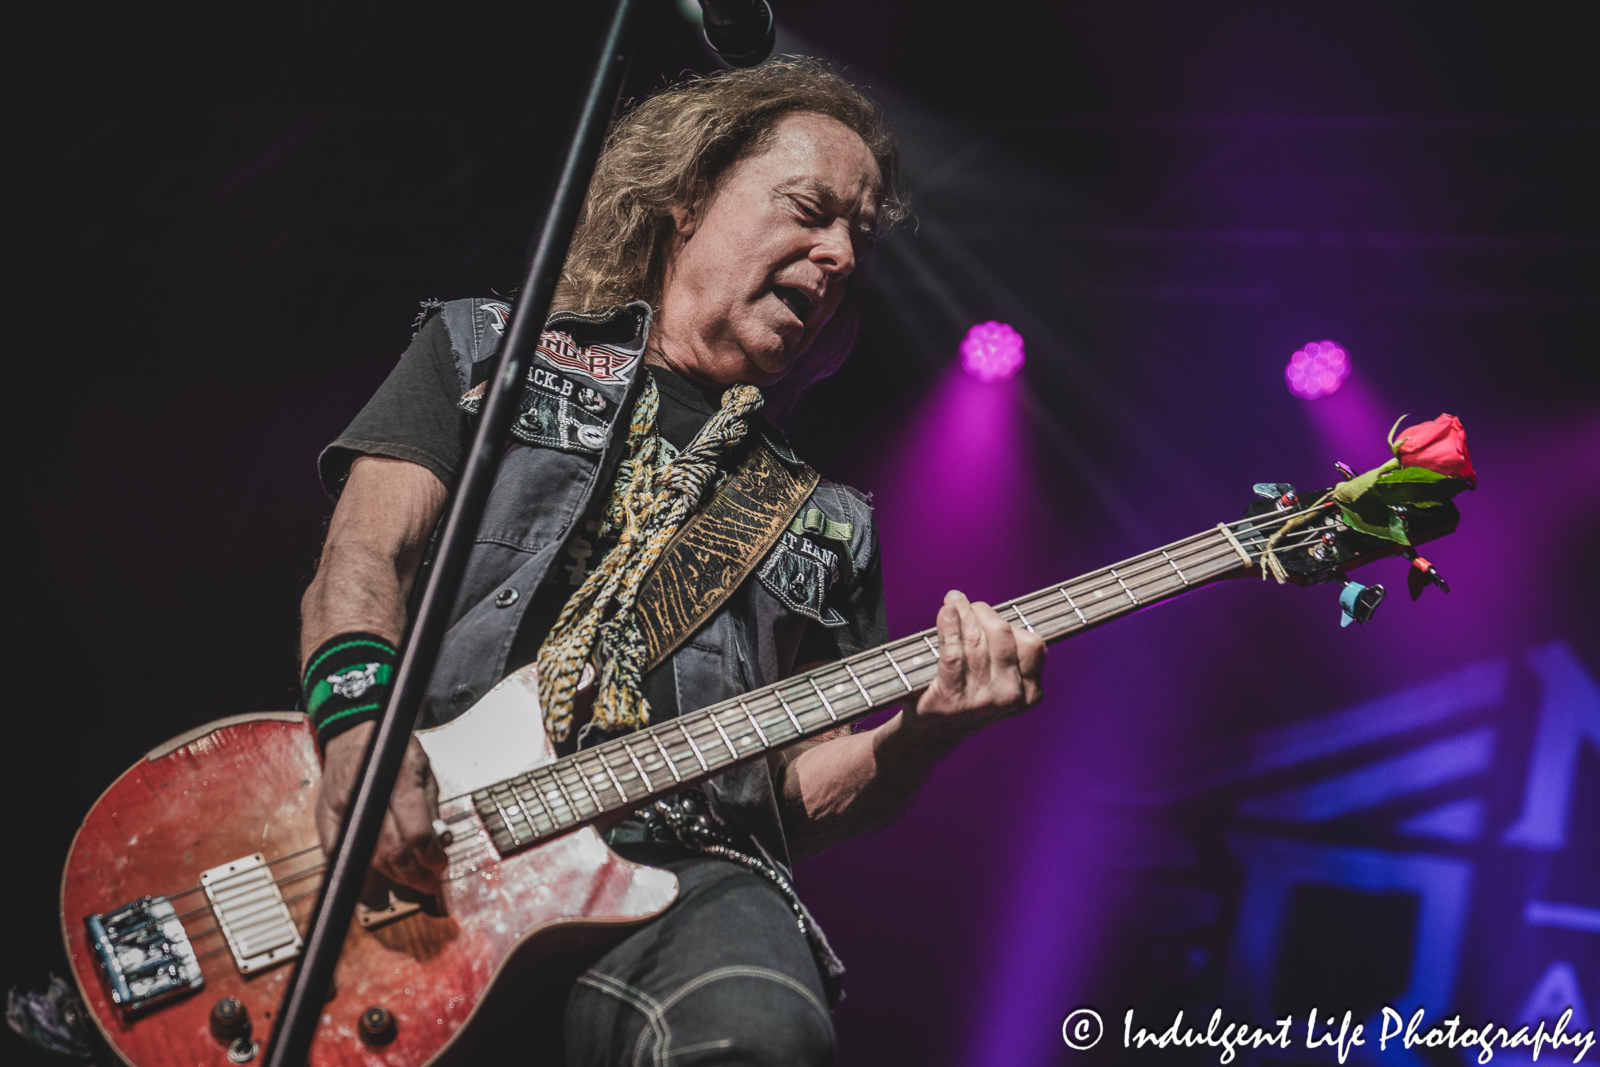 Frontman and bass guitarist Jack Blades of Night Ranger playing live at Star Pavilion inside of Ameristar Casino in Kansas City, MO on October 20, 2023.